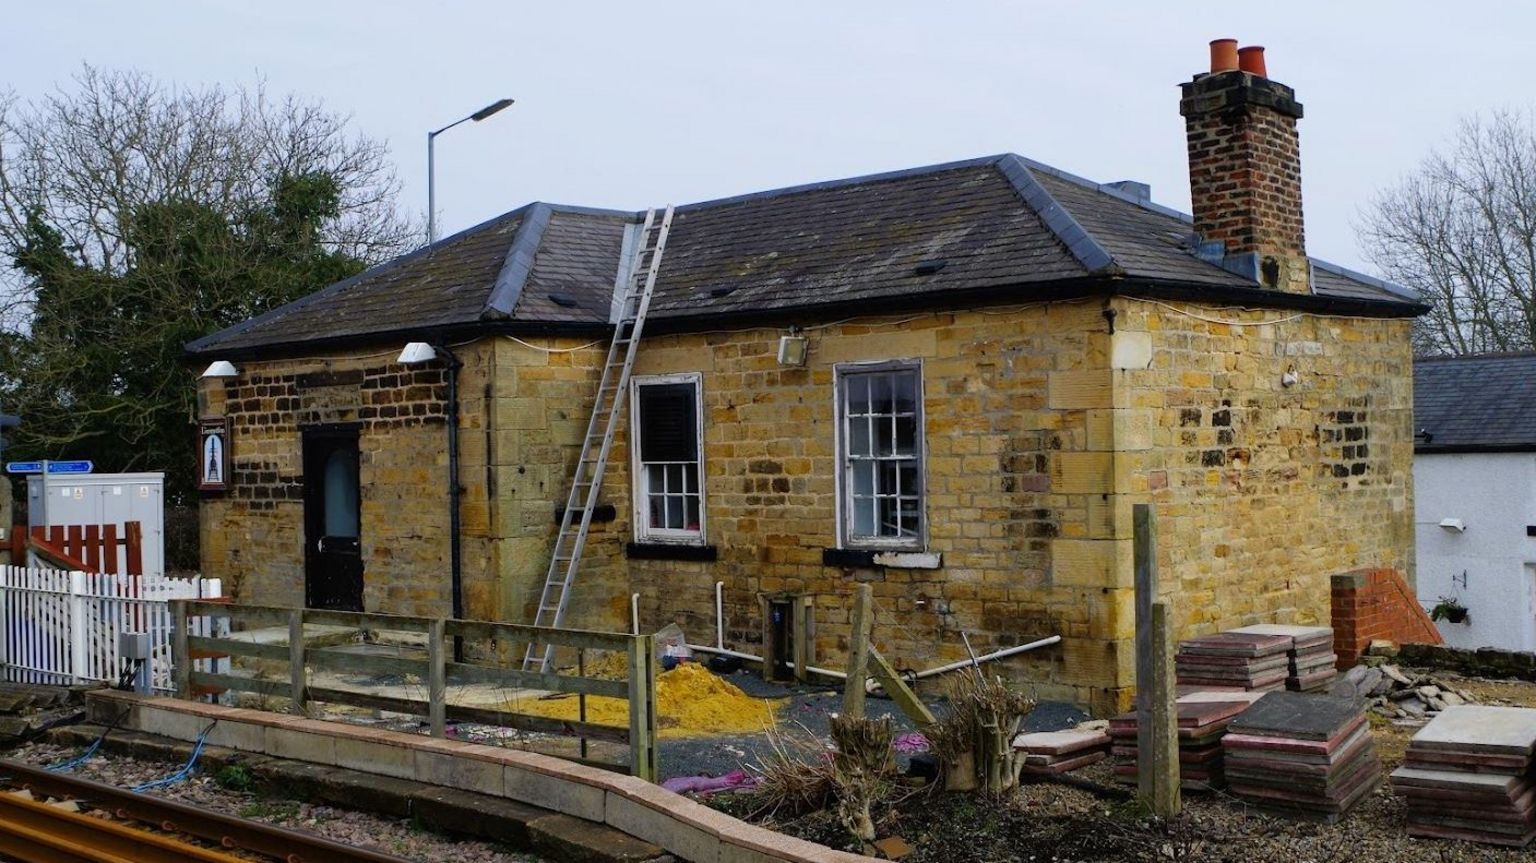 Heighington & Aycliffe Railway Station in County Durham